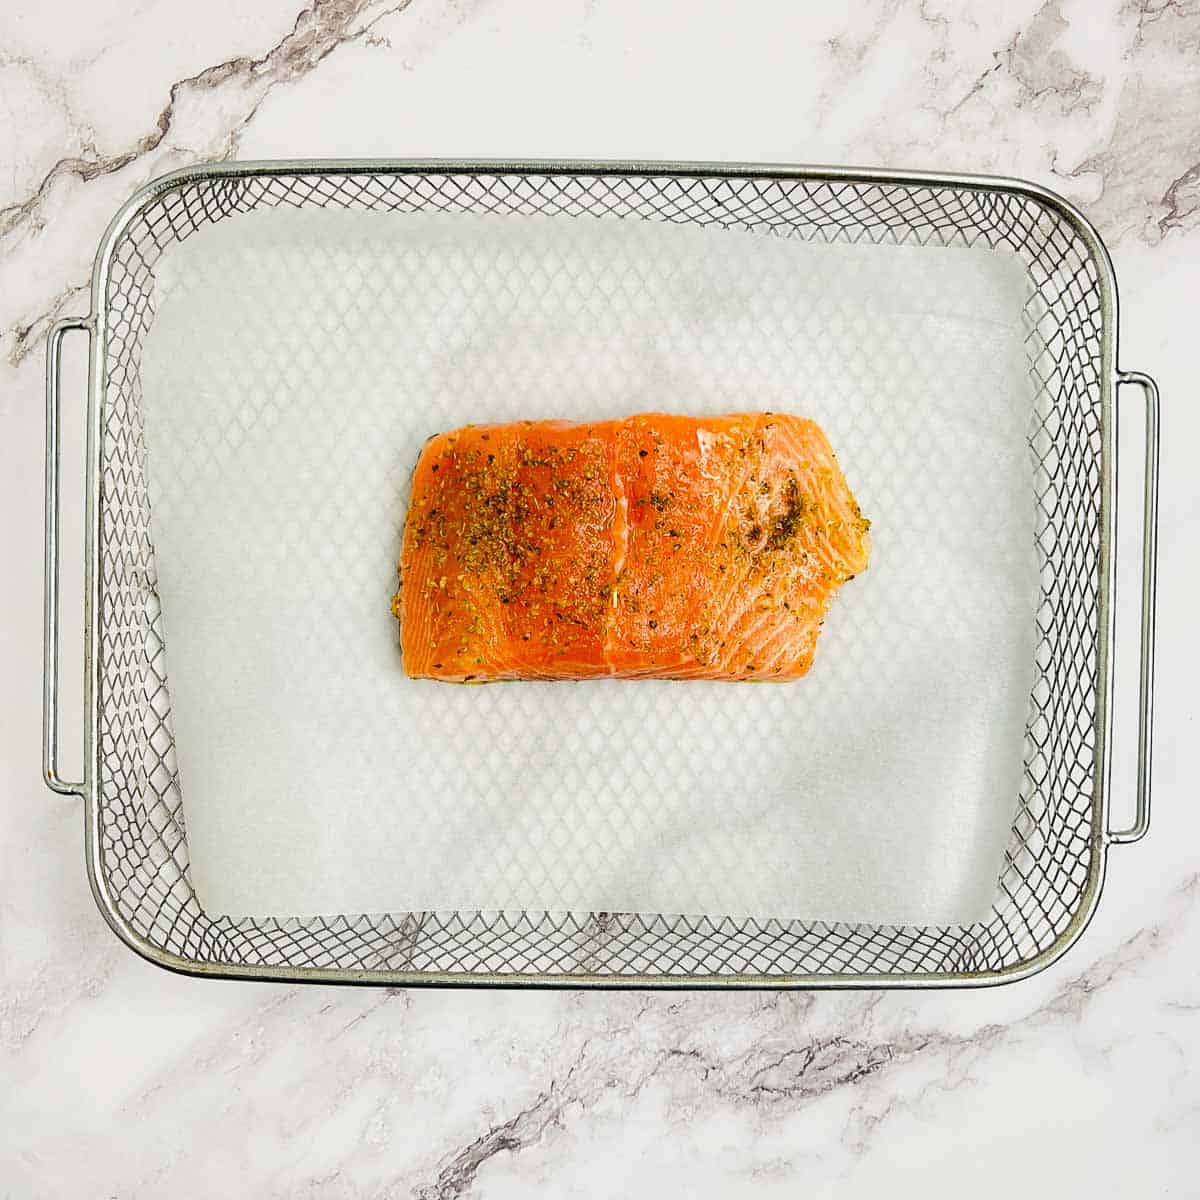 Marinated salmon fillet in the air fryer basket.